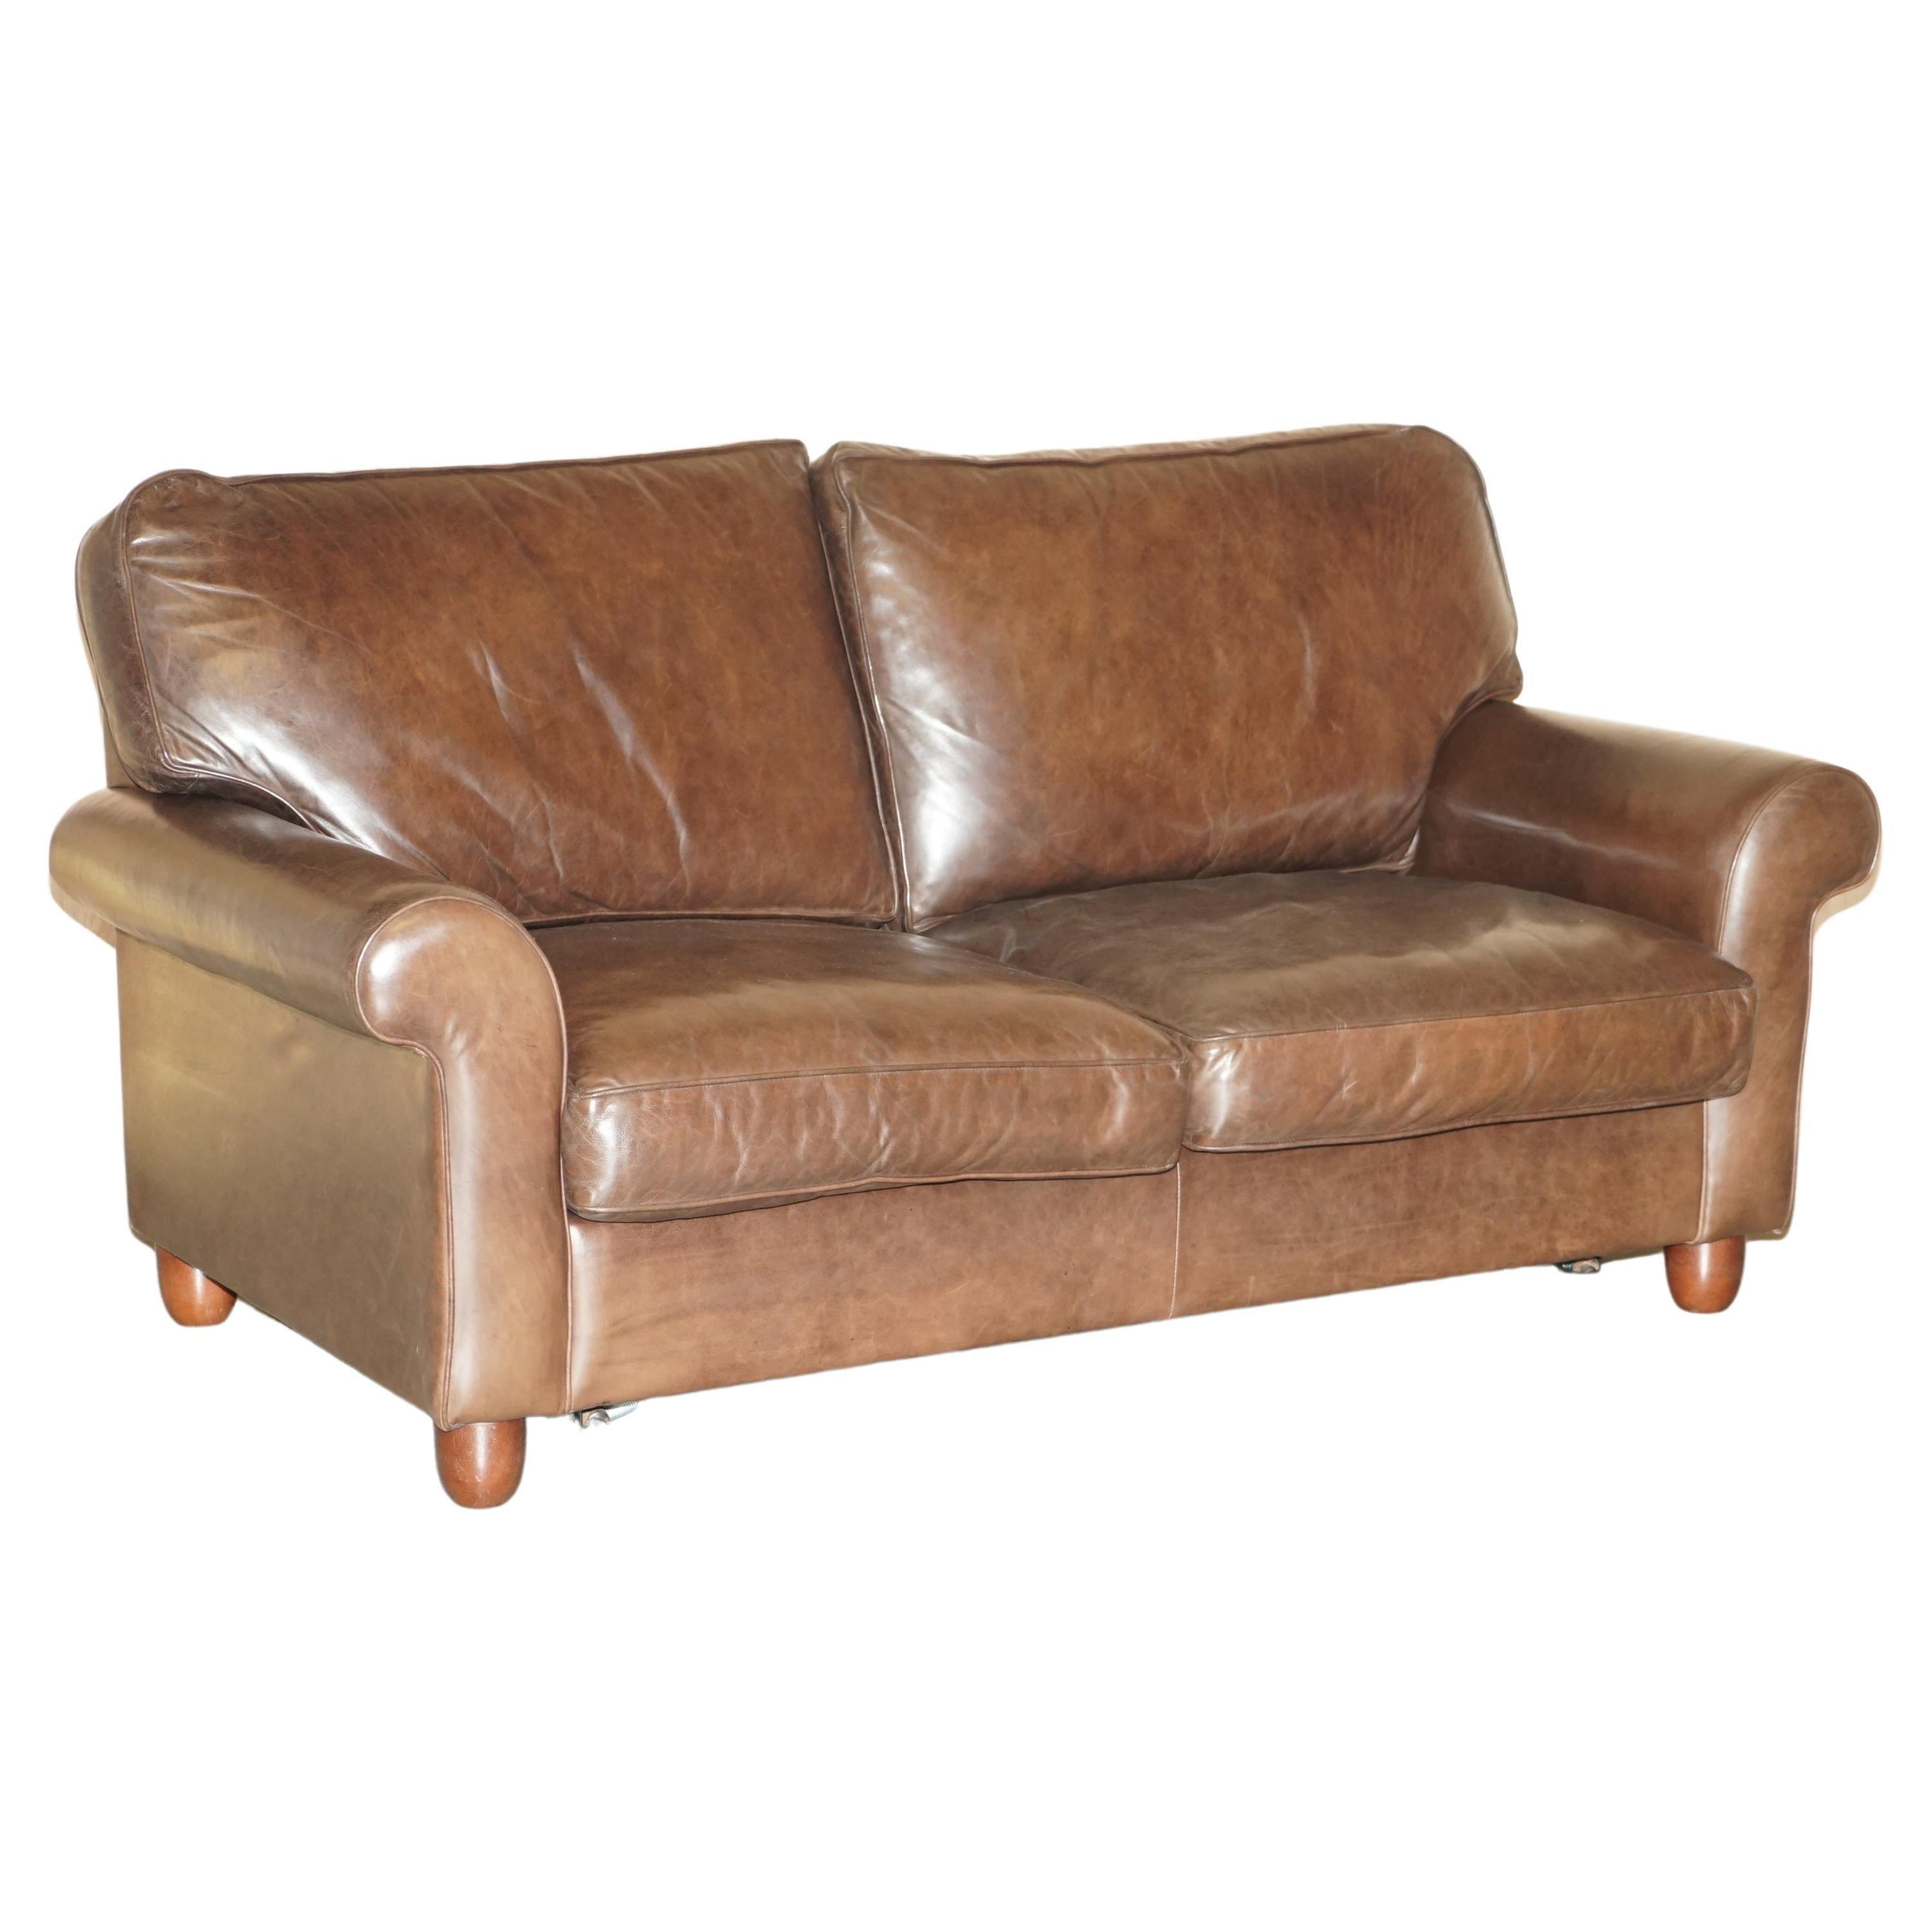 LOVELY HERITAGE BROWN LEATHER LAURA ASHLEY MORTIMER SOFABED IN SEHR GUTEM ZUSTAND im Angebot